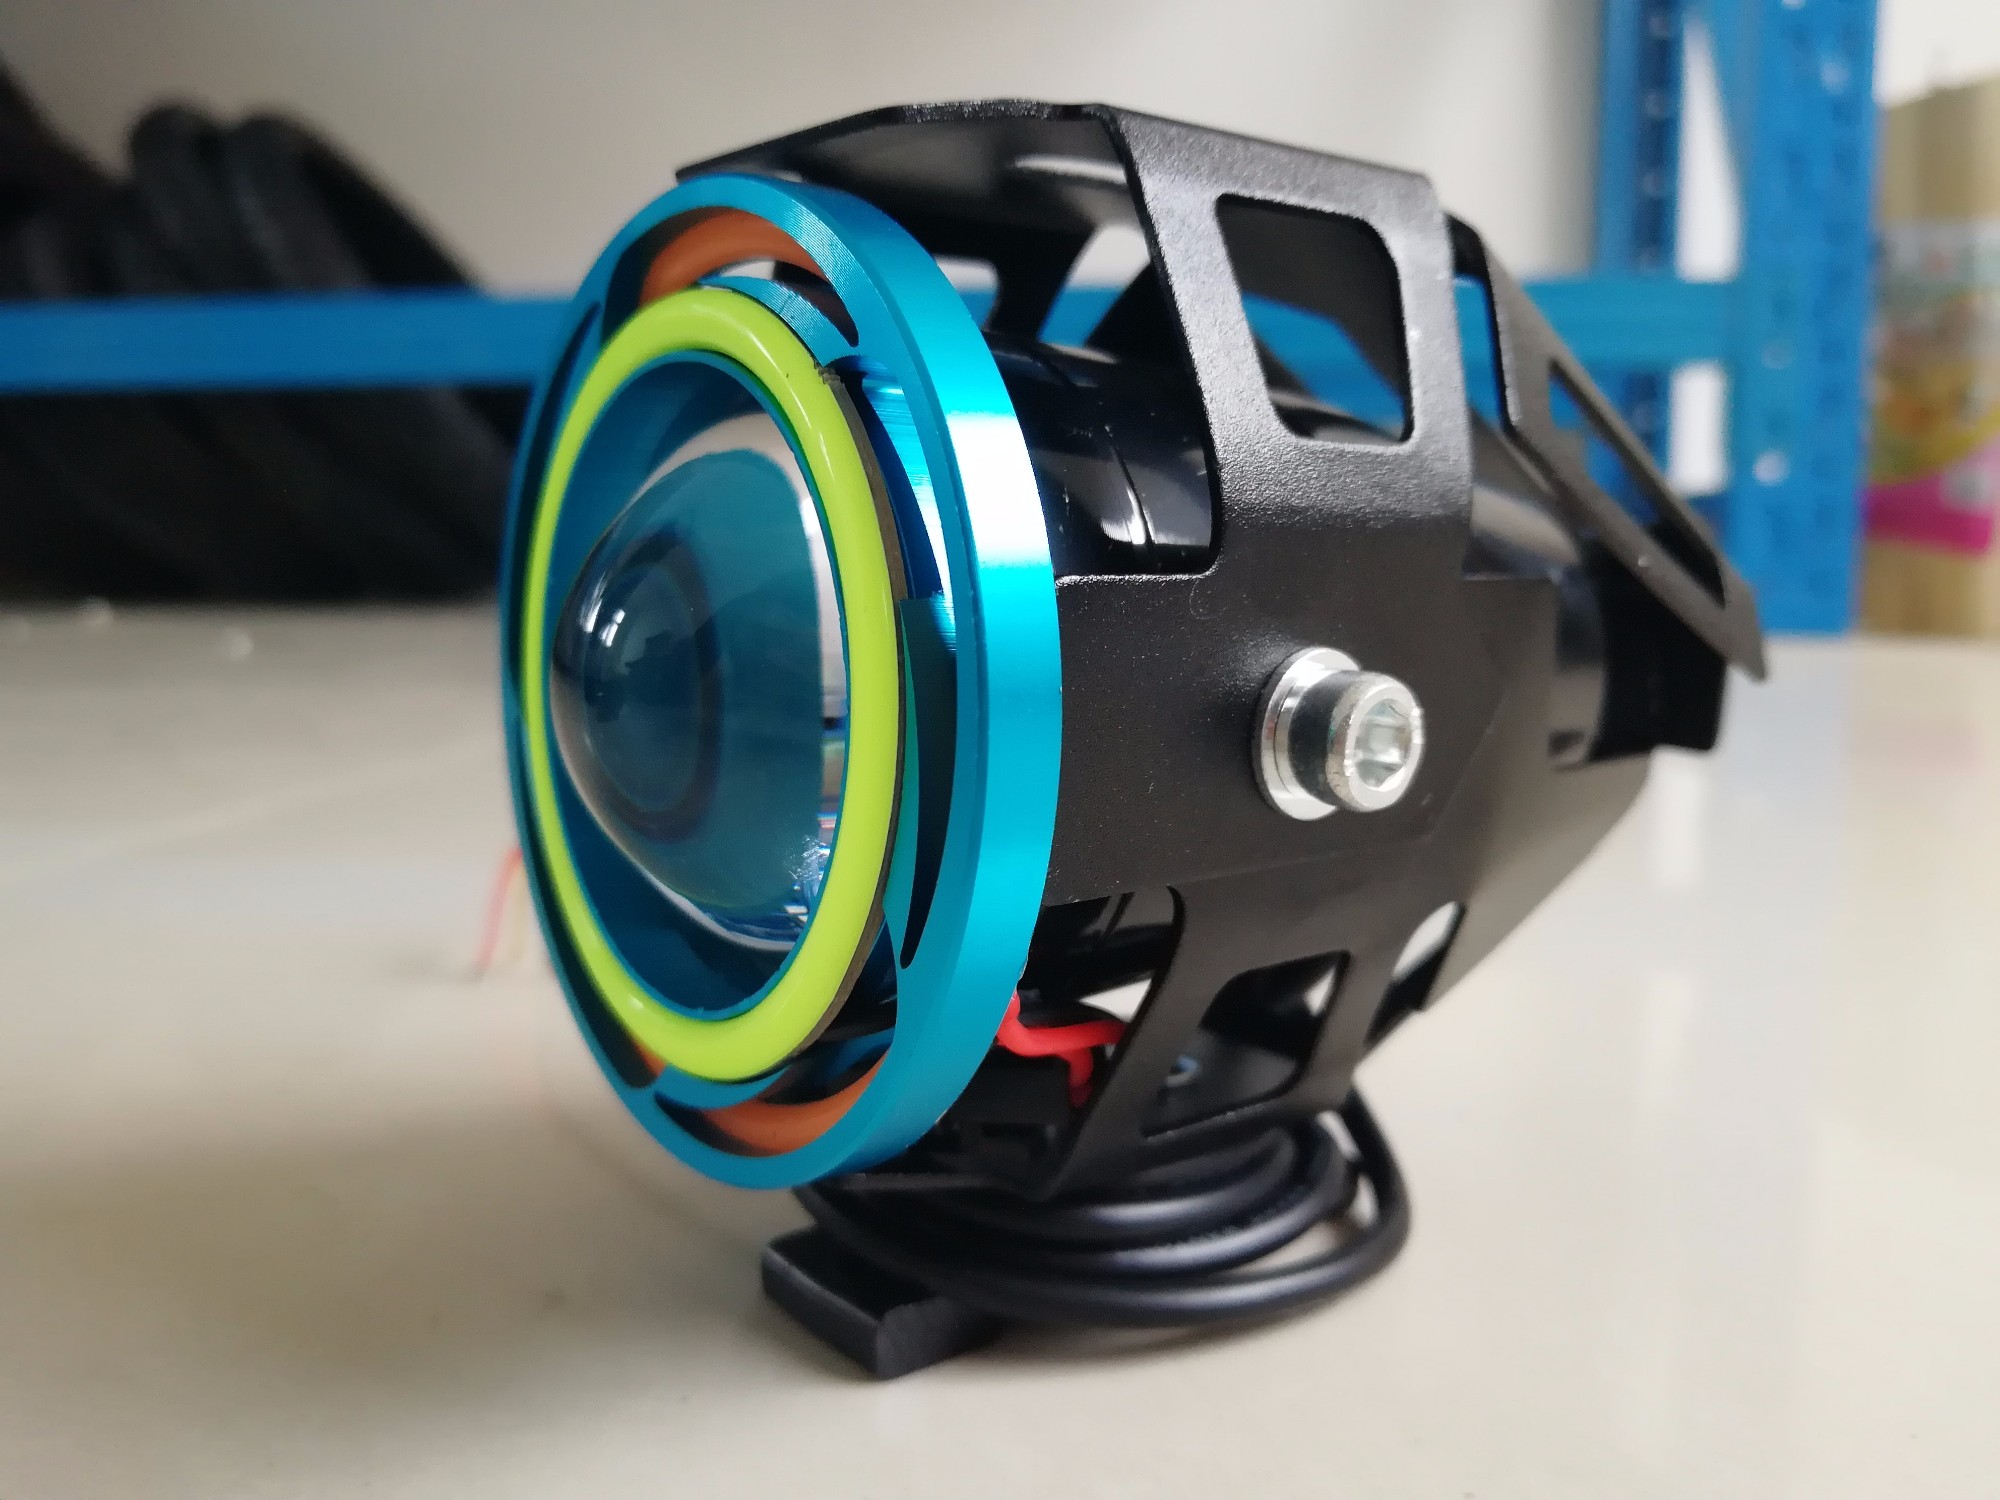 LED HEAD LIGHT FOR MOTORCYCLE